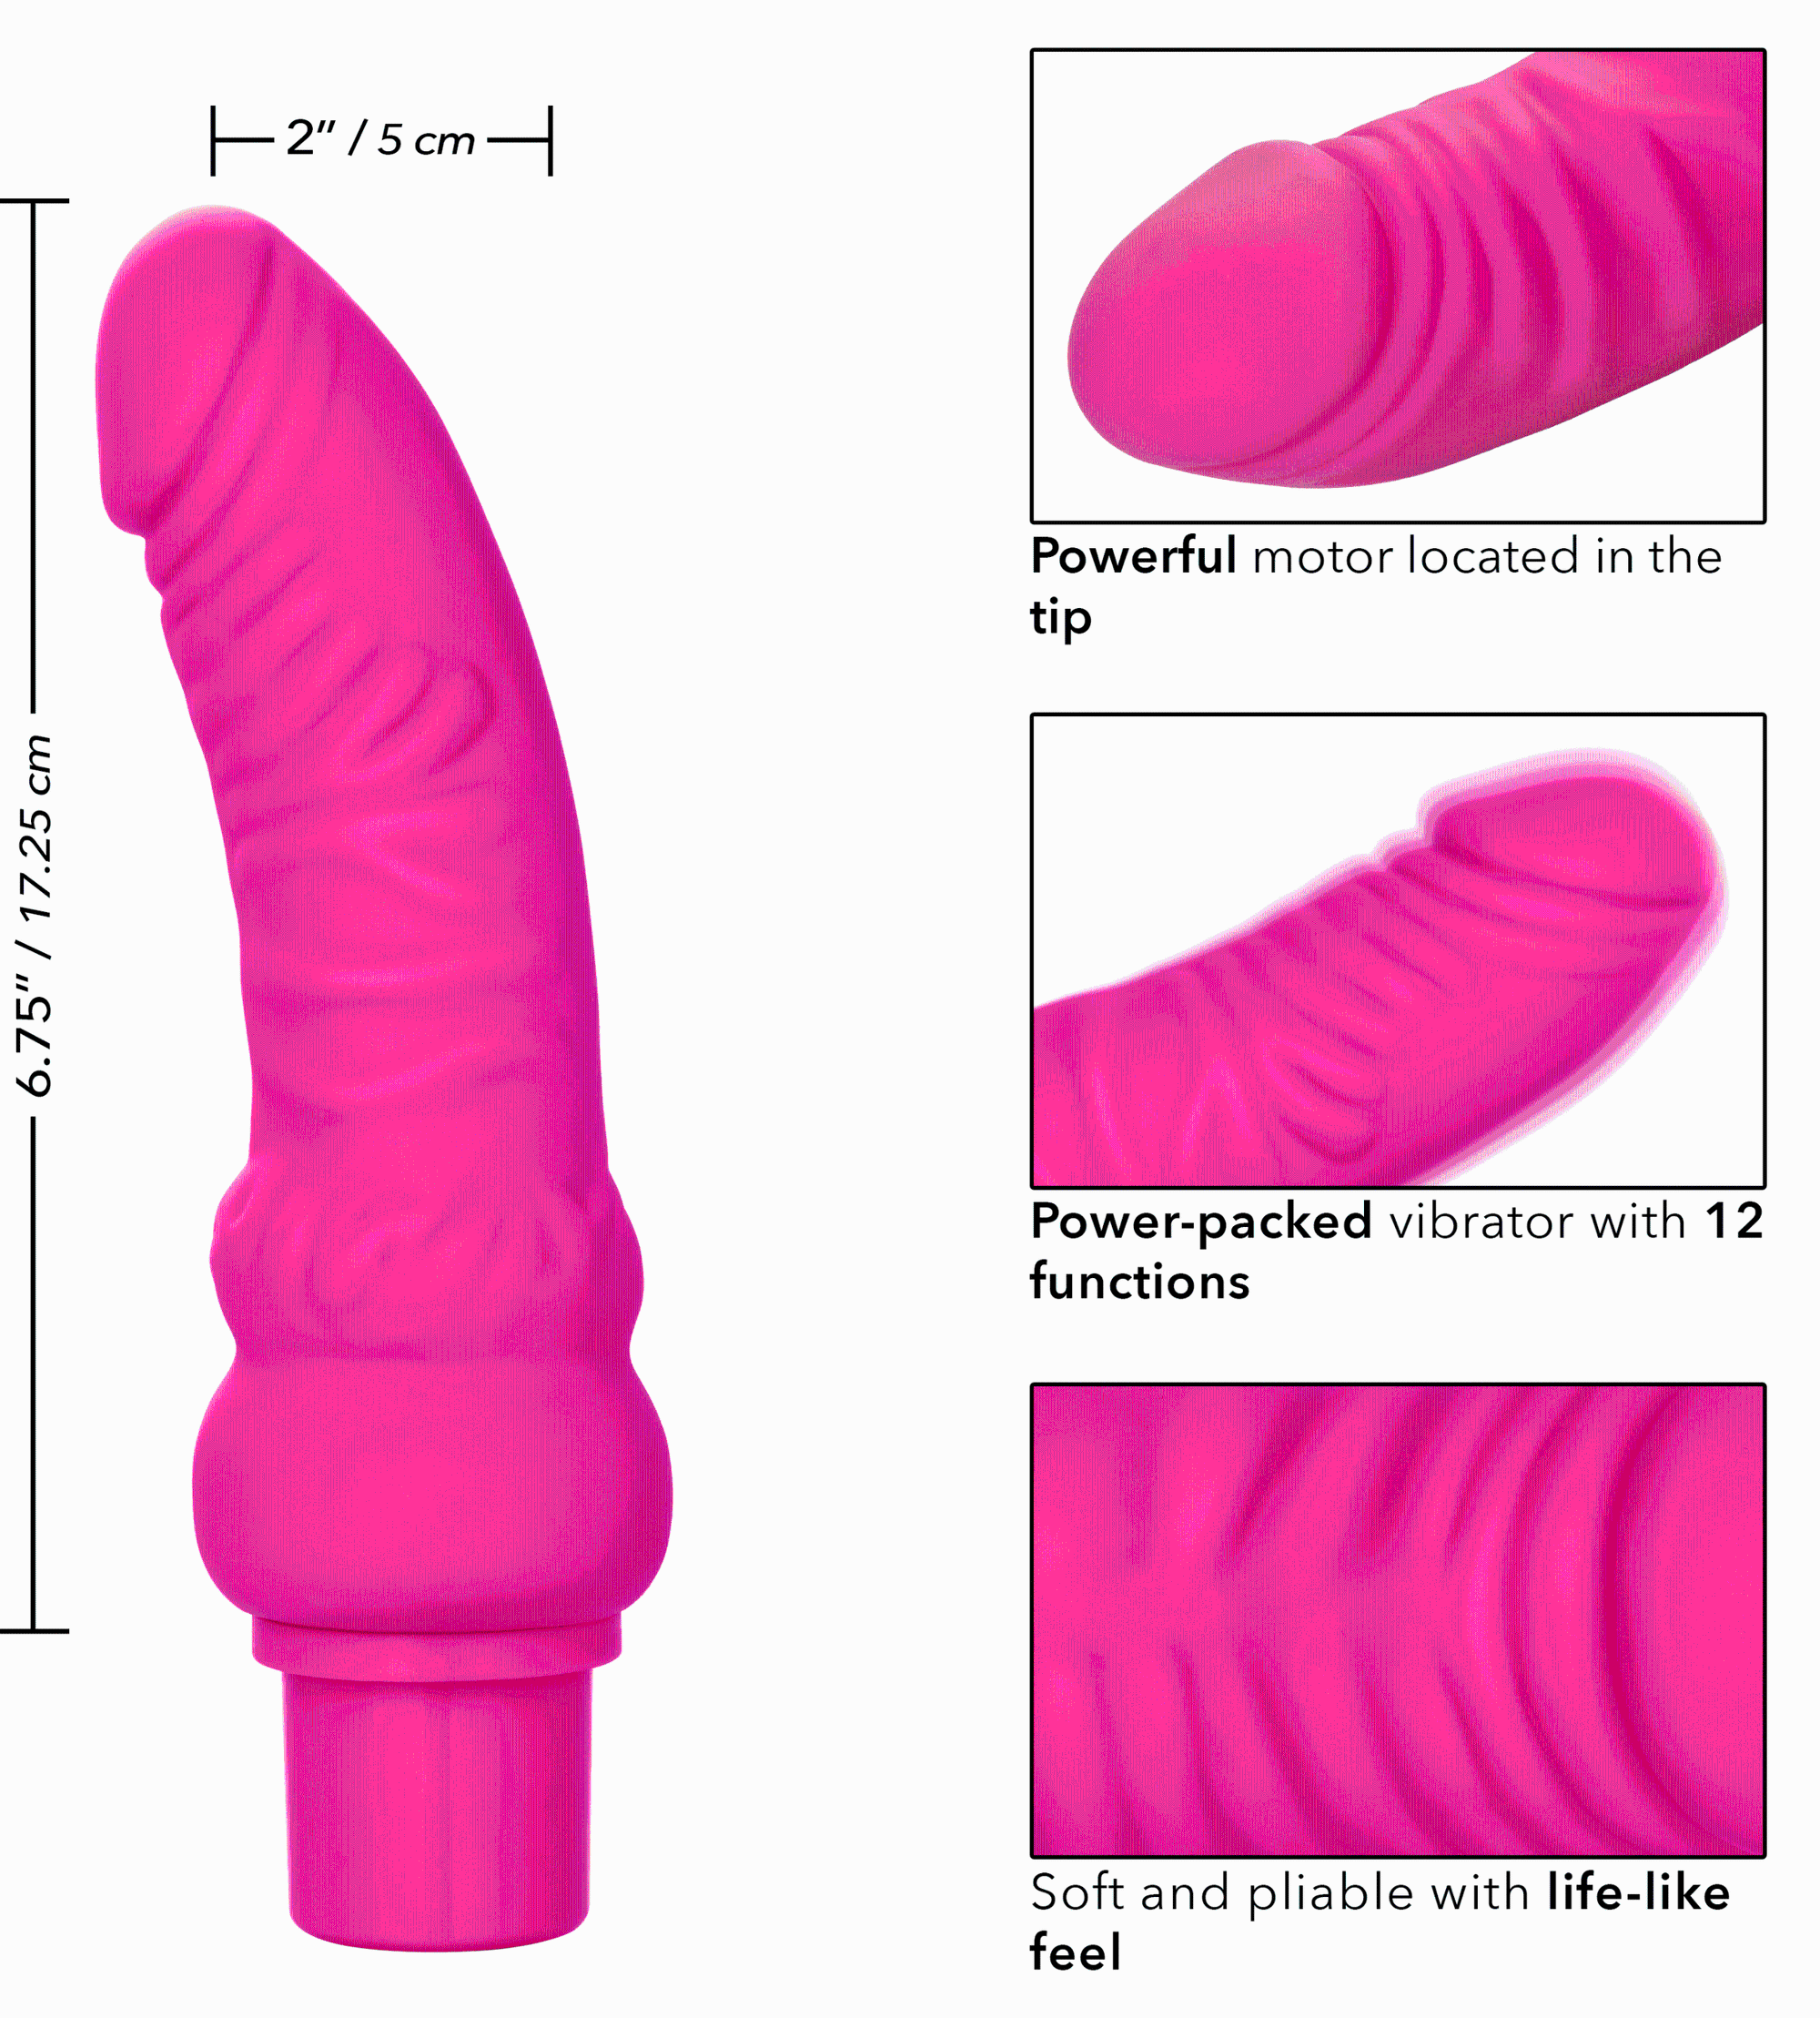 real cock, most realistic dildo 